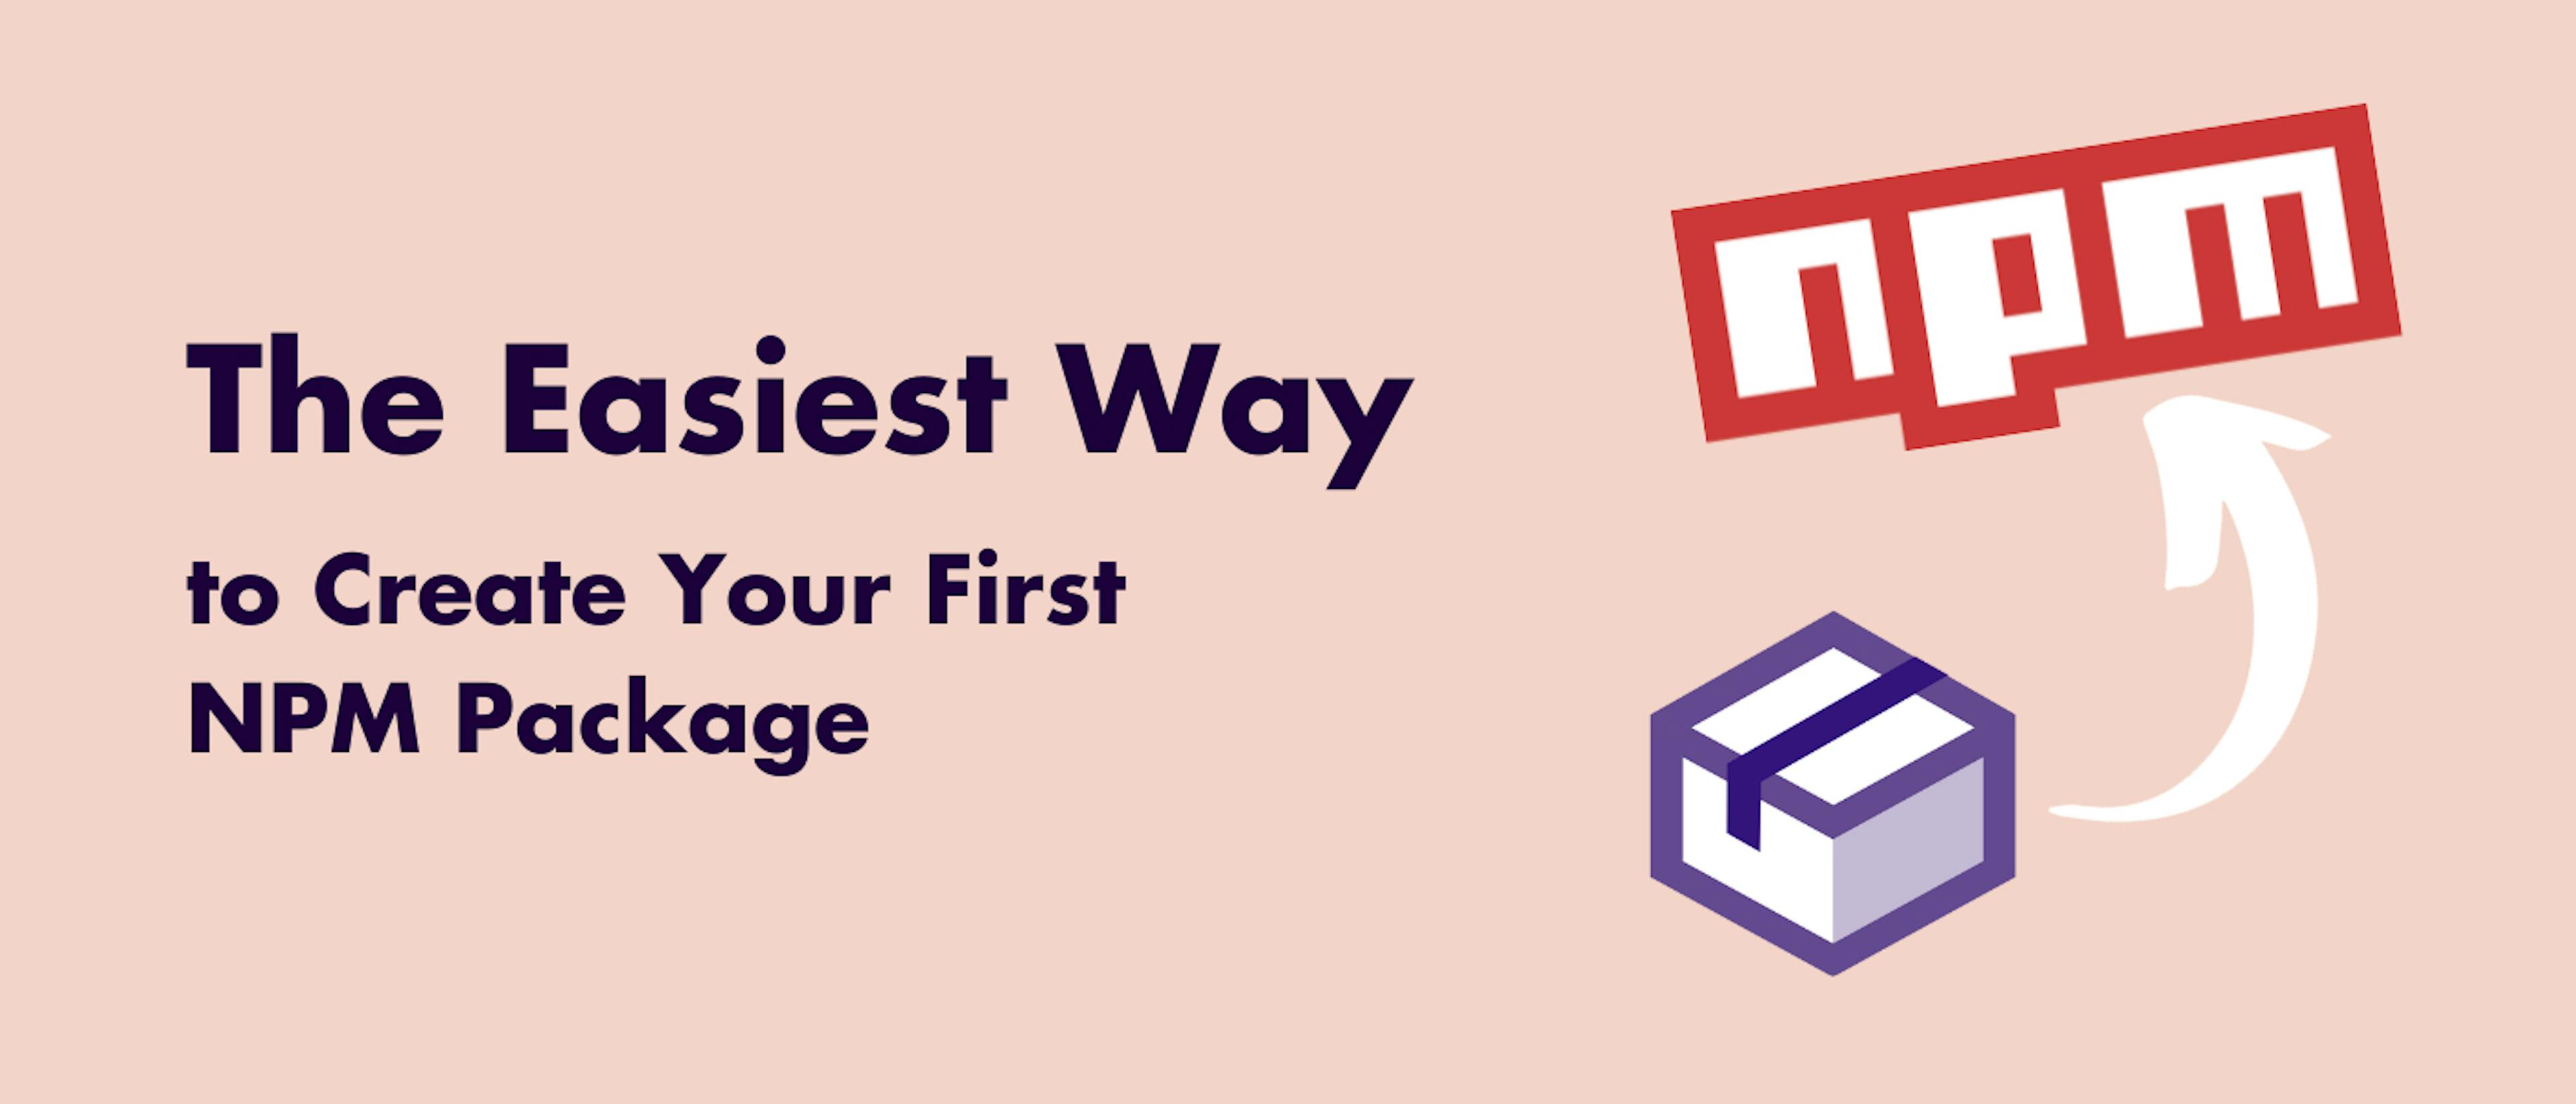 featured image - The Easiest Way to Create Your First NPM Package